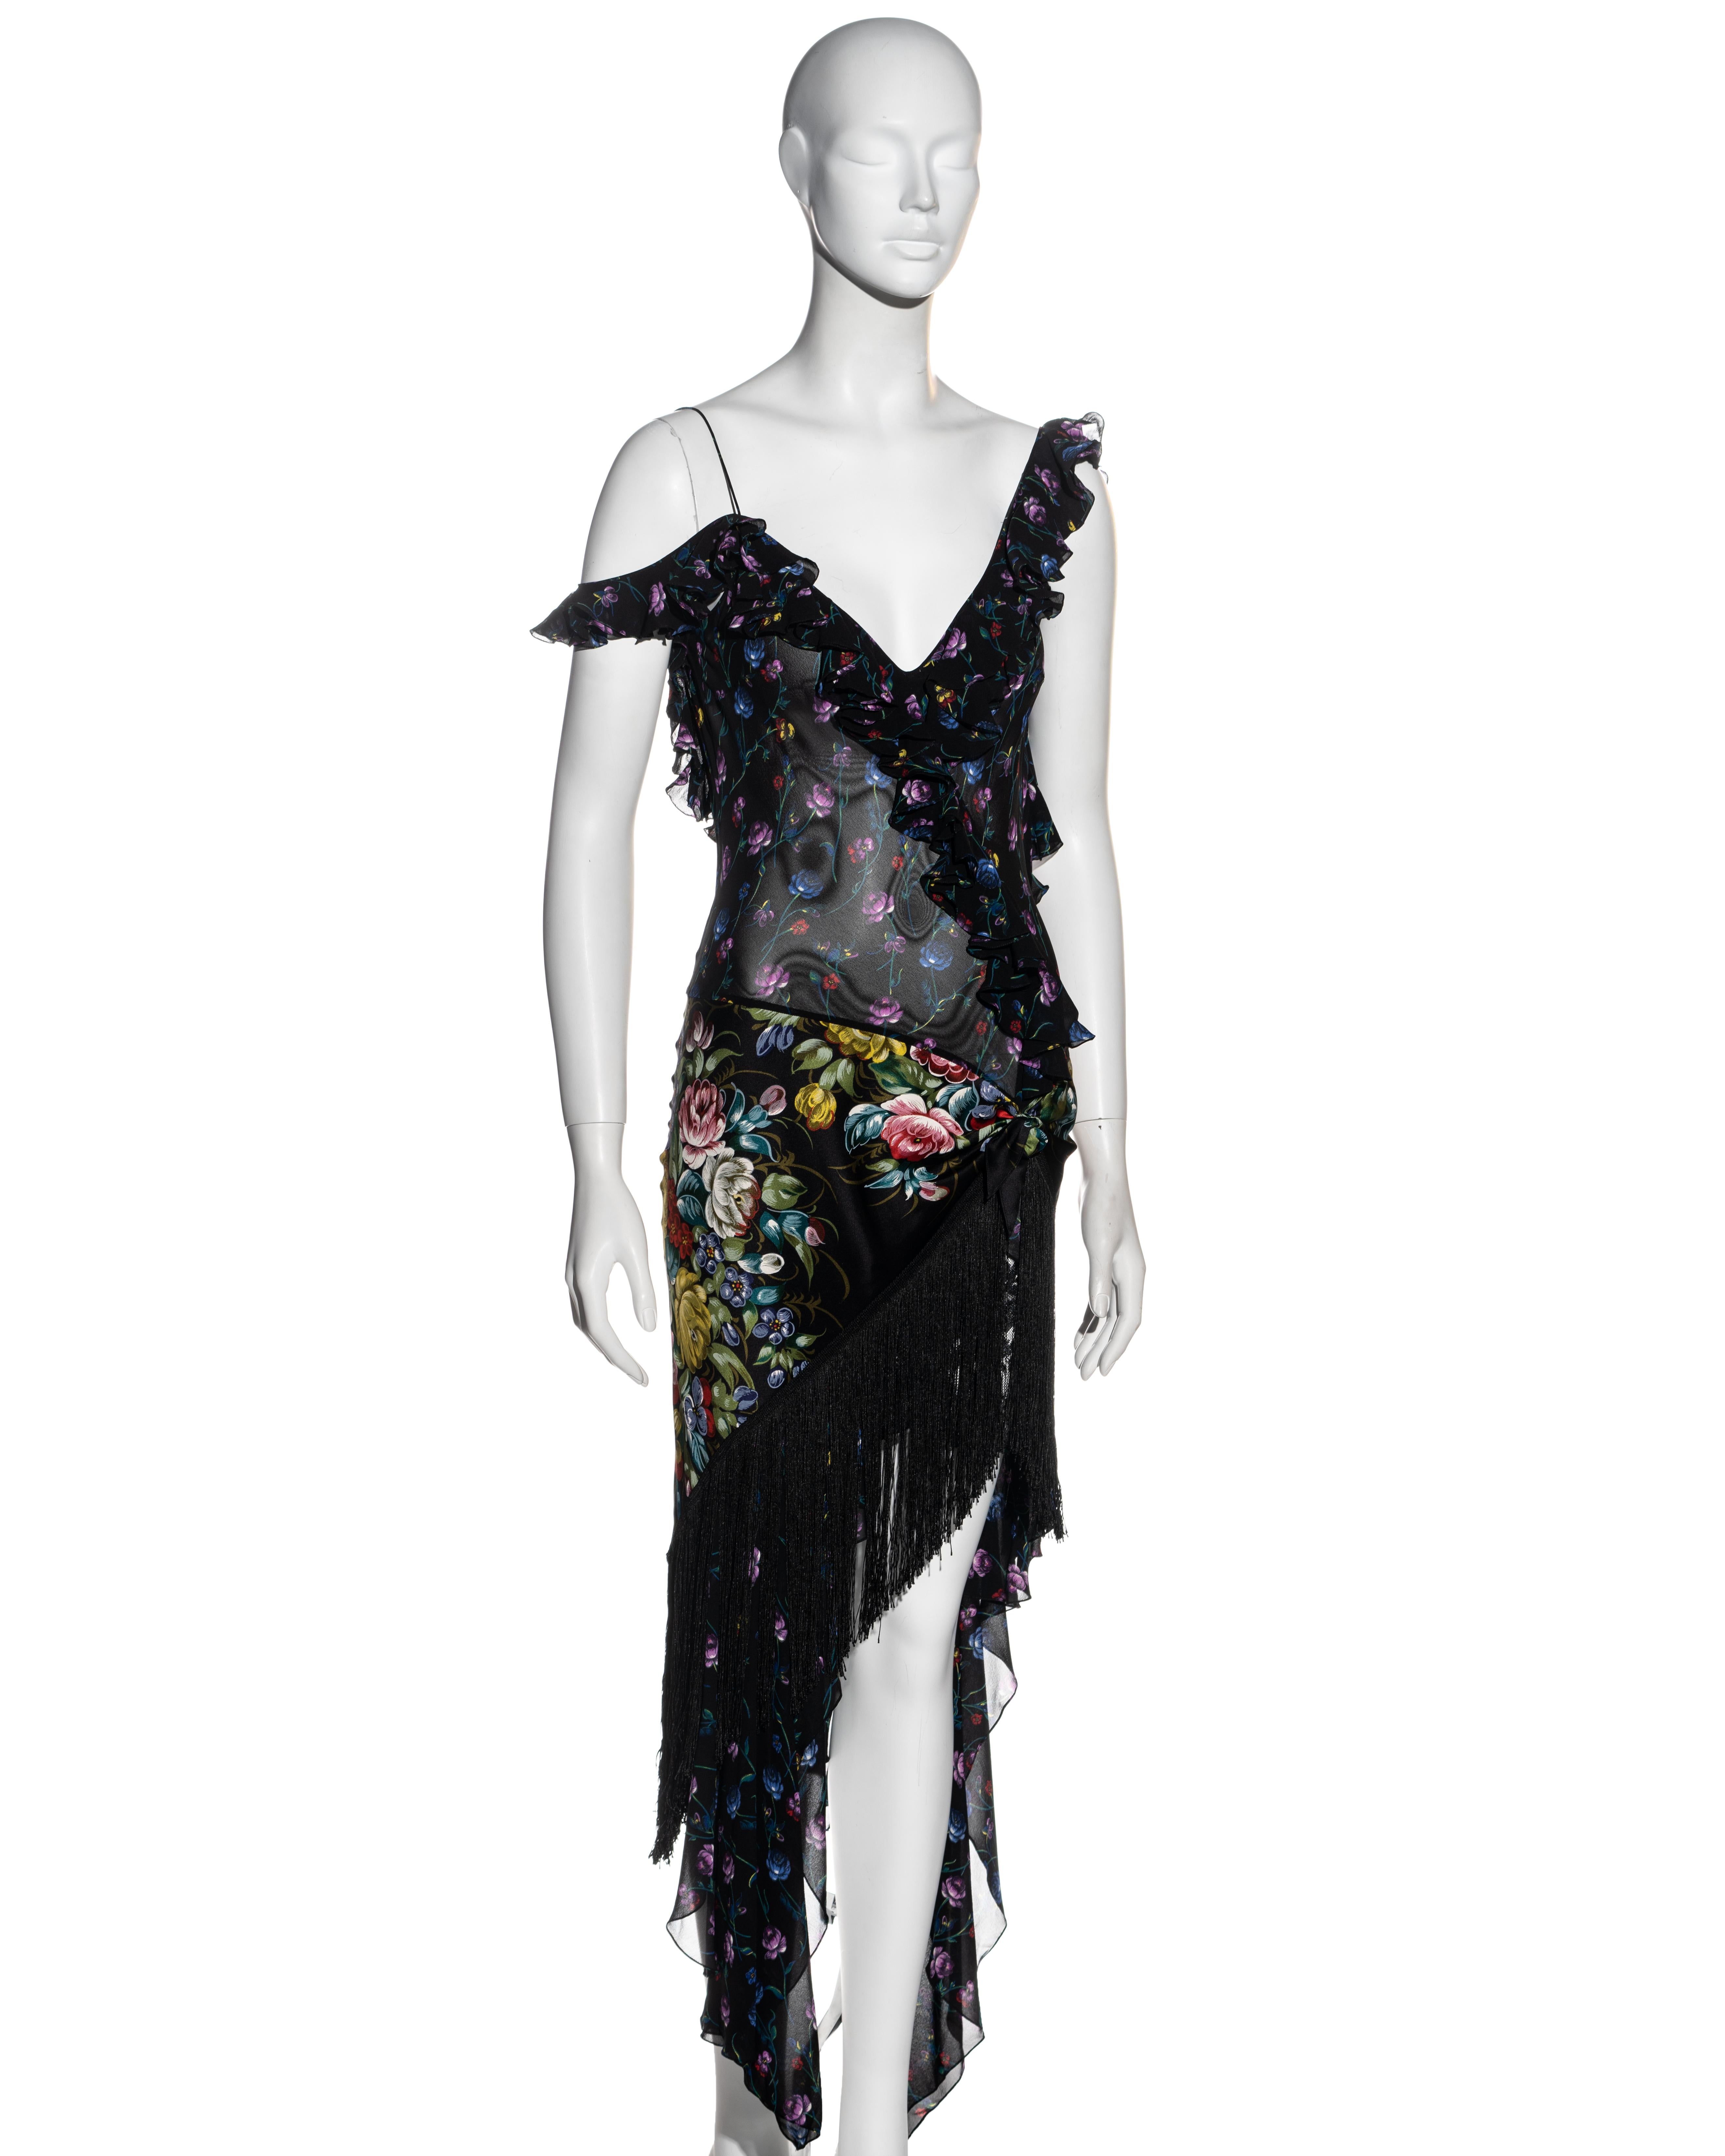 ▪ John Galliano floral silk chiffon evening dress
▪ Blue, purple, yellow and red floral print with black base 
▪ Flounced edging 
▪ Zhostovo style silk scarf with fringing attached around hips 
▪ Low back
▪ Black lace underskirt 
▪ FR 38 - UK 10 -